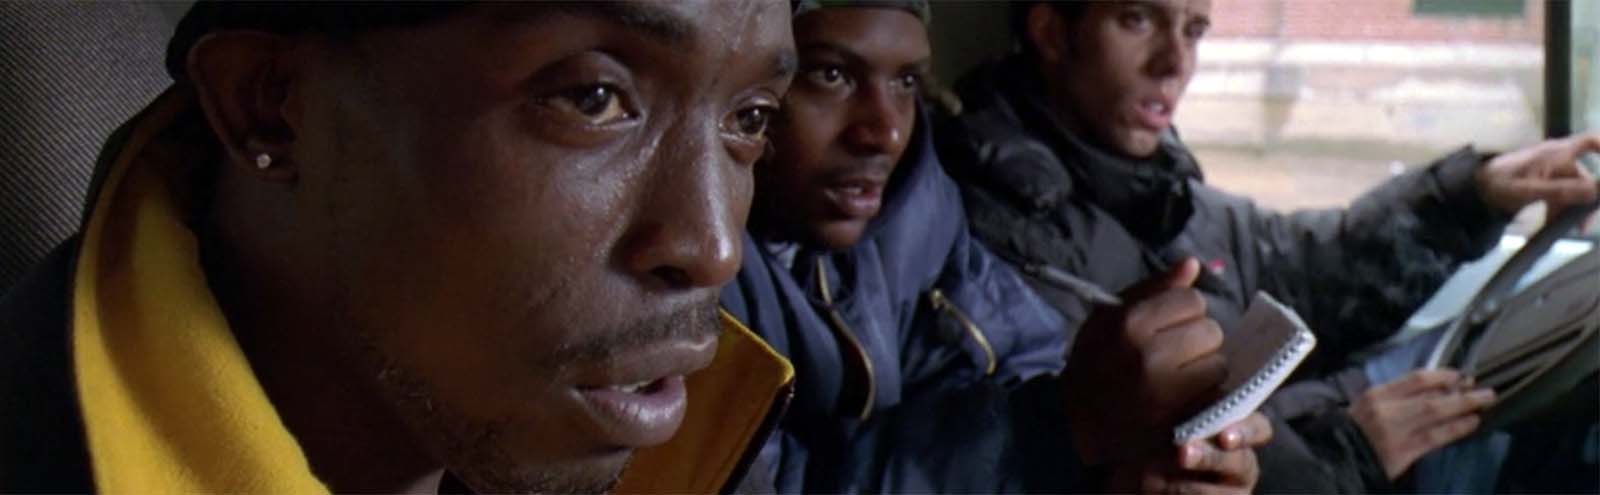 Michael K. Williams as Omar on The Wire episode 3